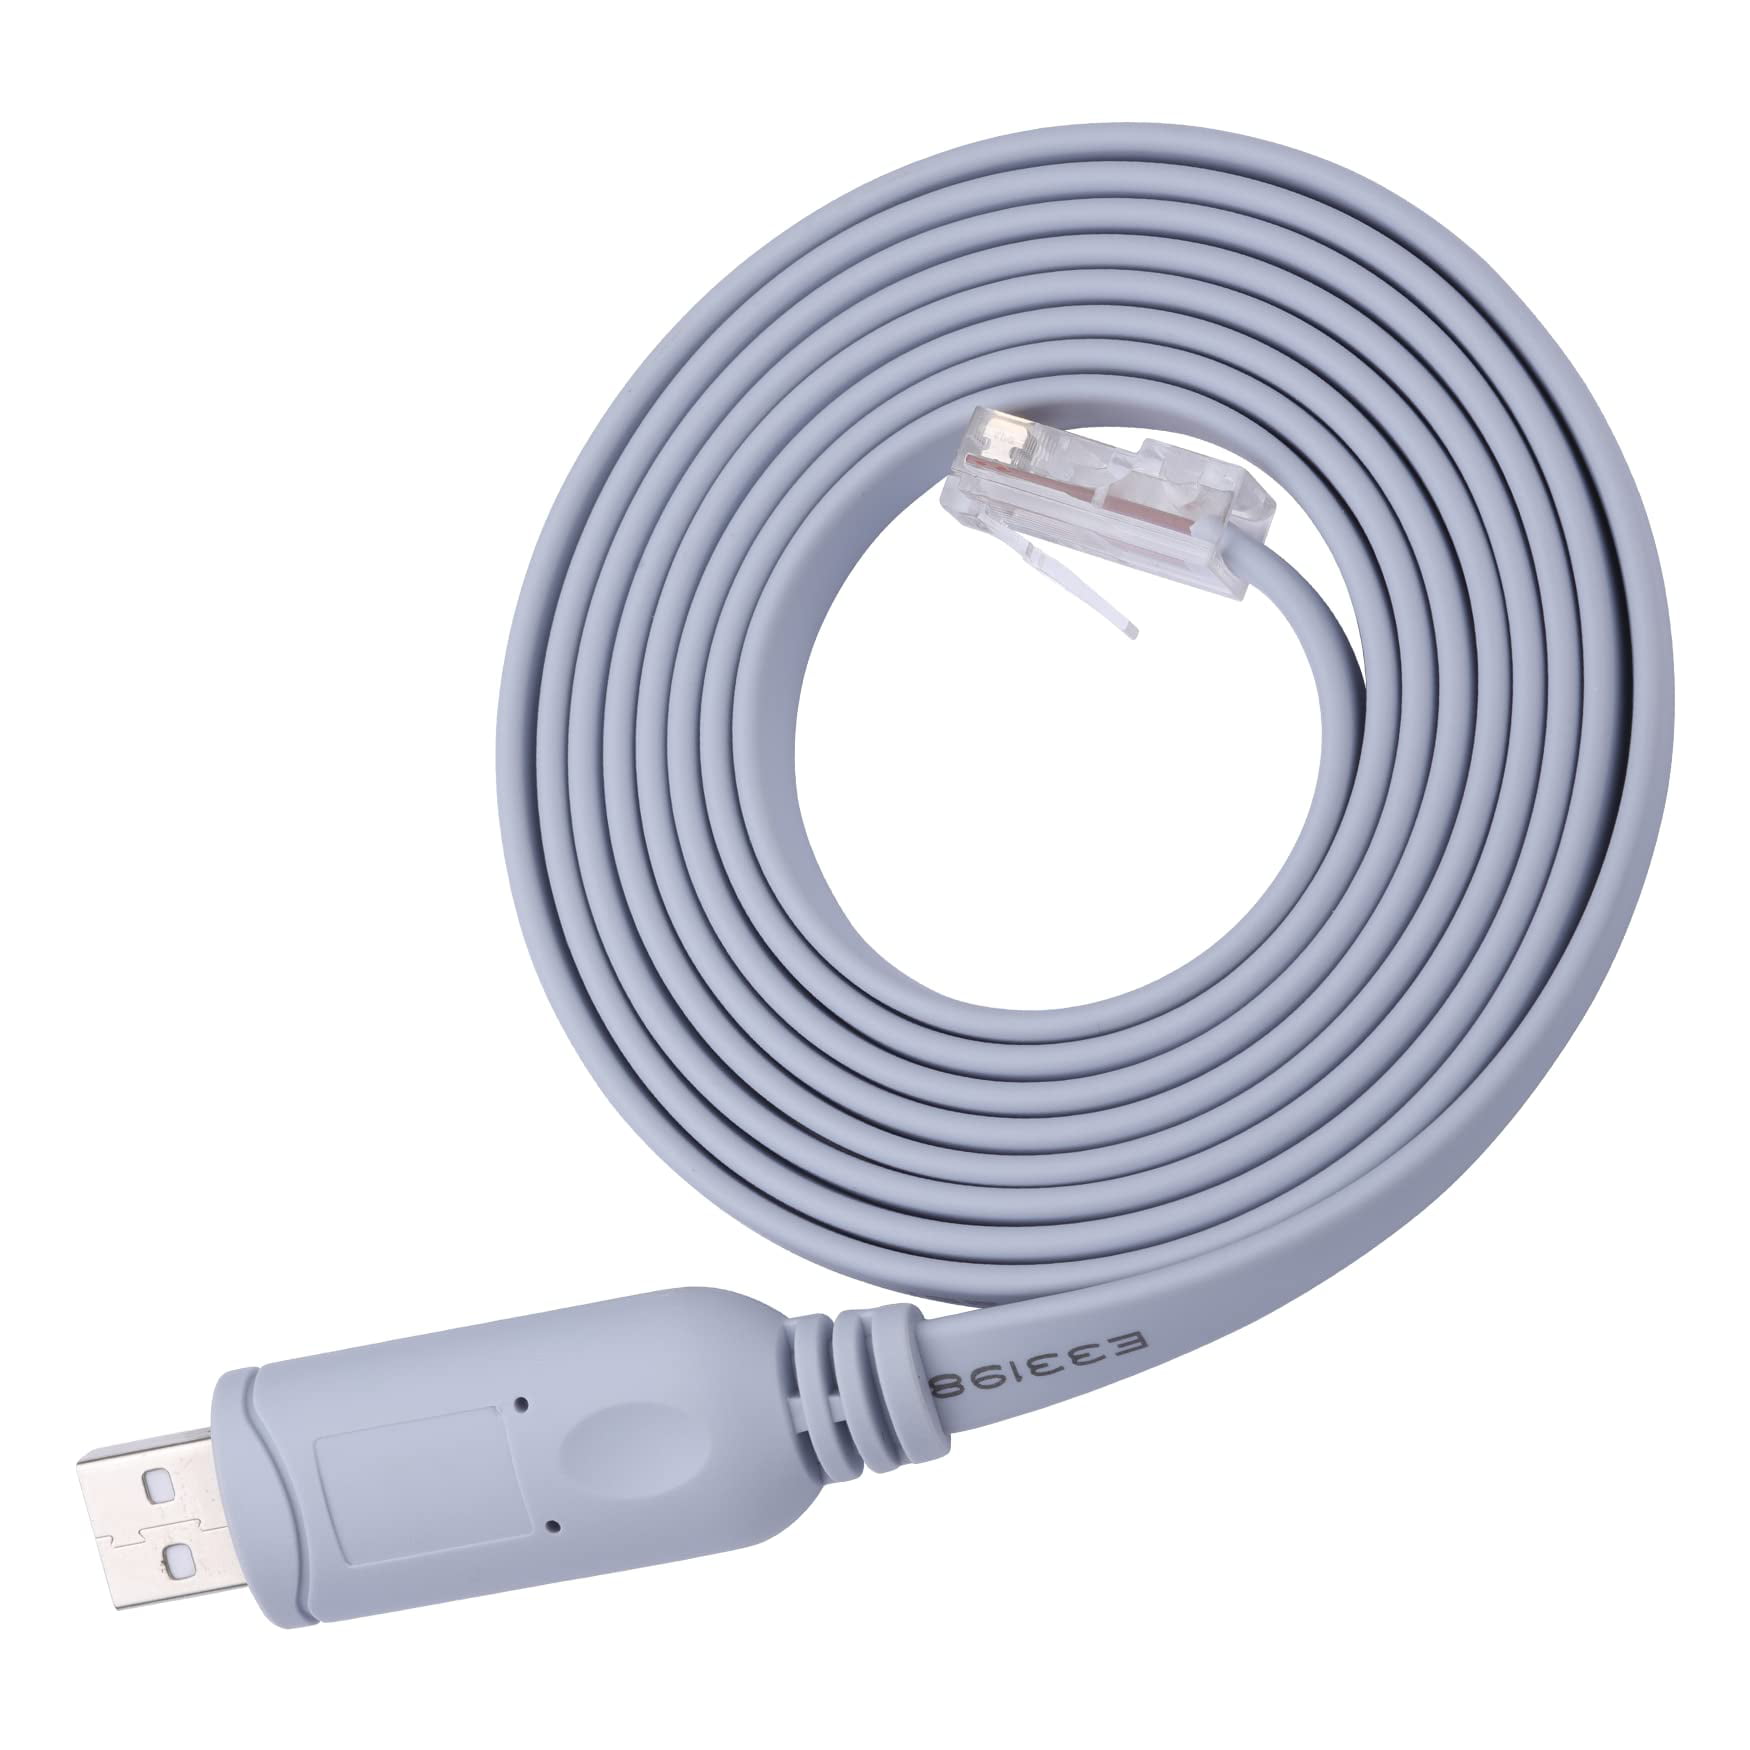 pianist Lave jurist Console Cable,Cisco Console Cable,USB Console Cable with FTDI Chip,USB to  RJ45 Serial Adapter Compatible with Cisco,HP,NETGEAR,Huawei,Routers/Switches  for Laptop in Linux,Windows, Mac (6FT) - Walmart.com